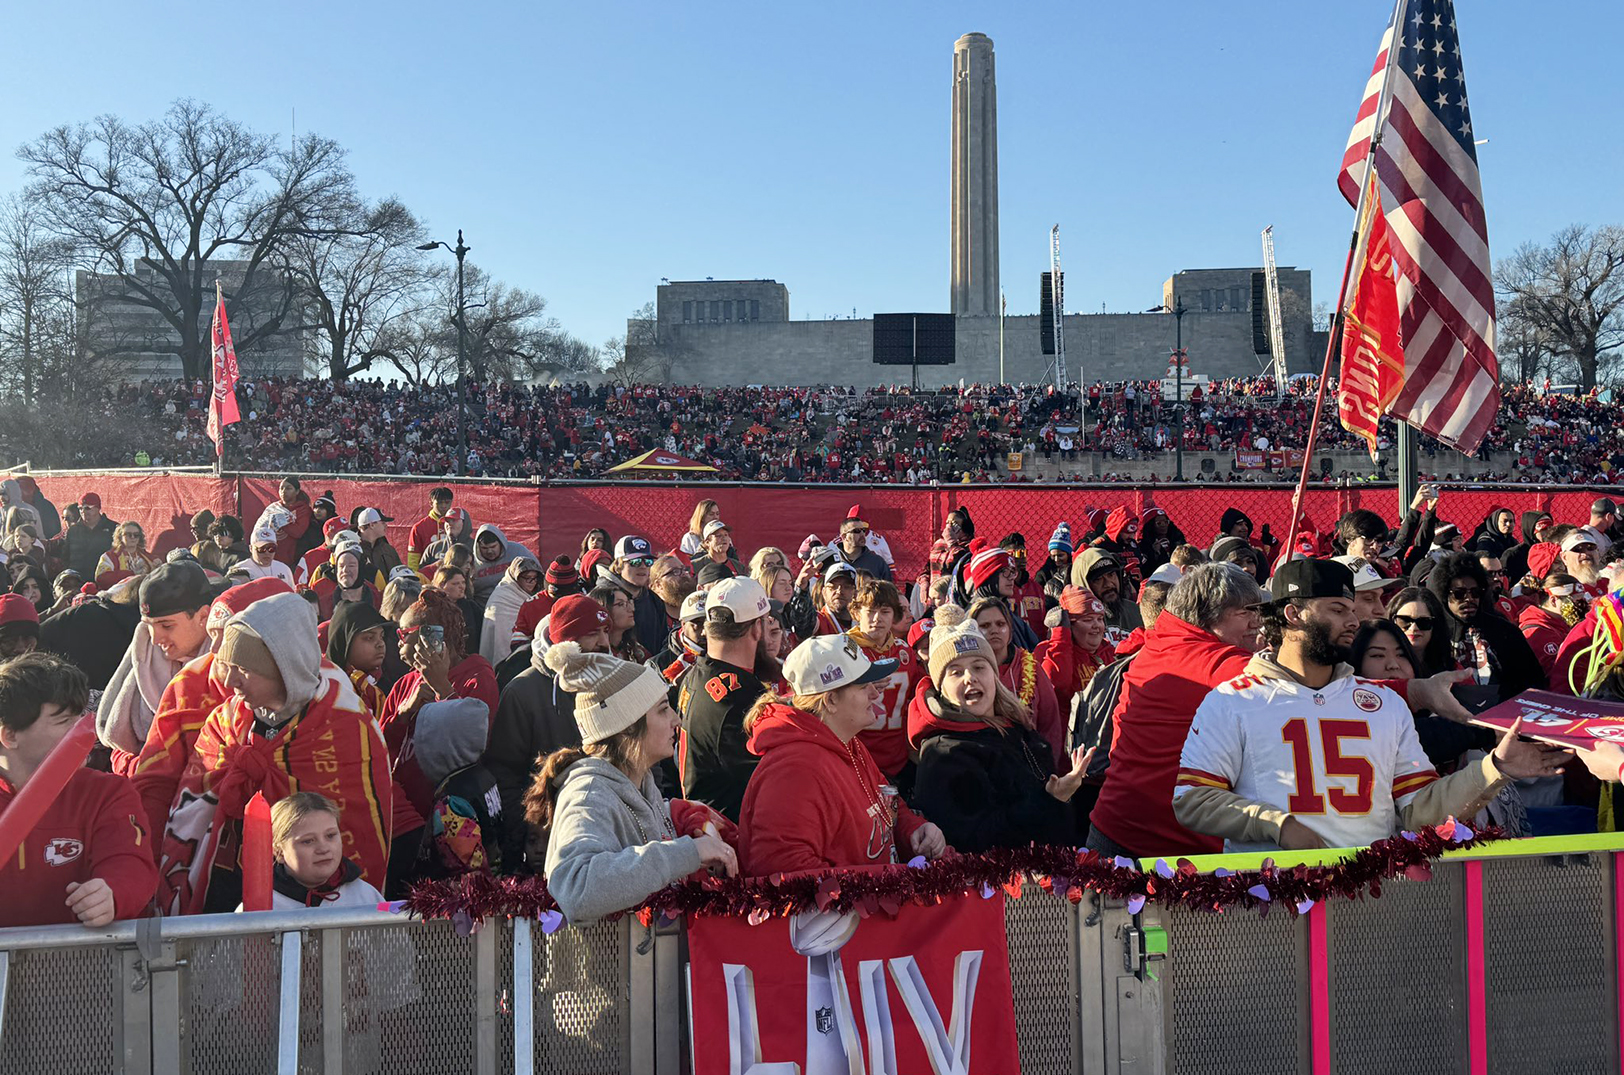 Fans packed Chiefs rally, one didn’t come home; citywide trauma from shooting won’t heal quickly, grief expert says